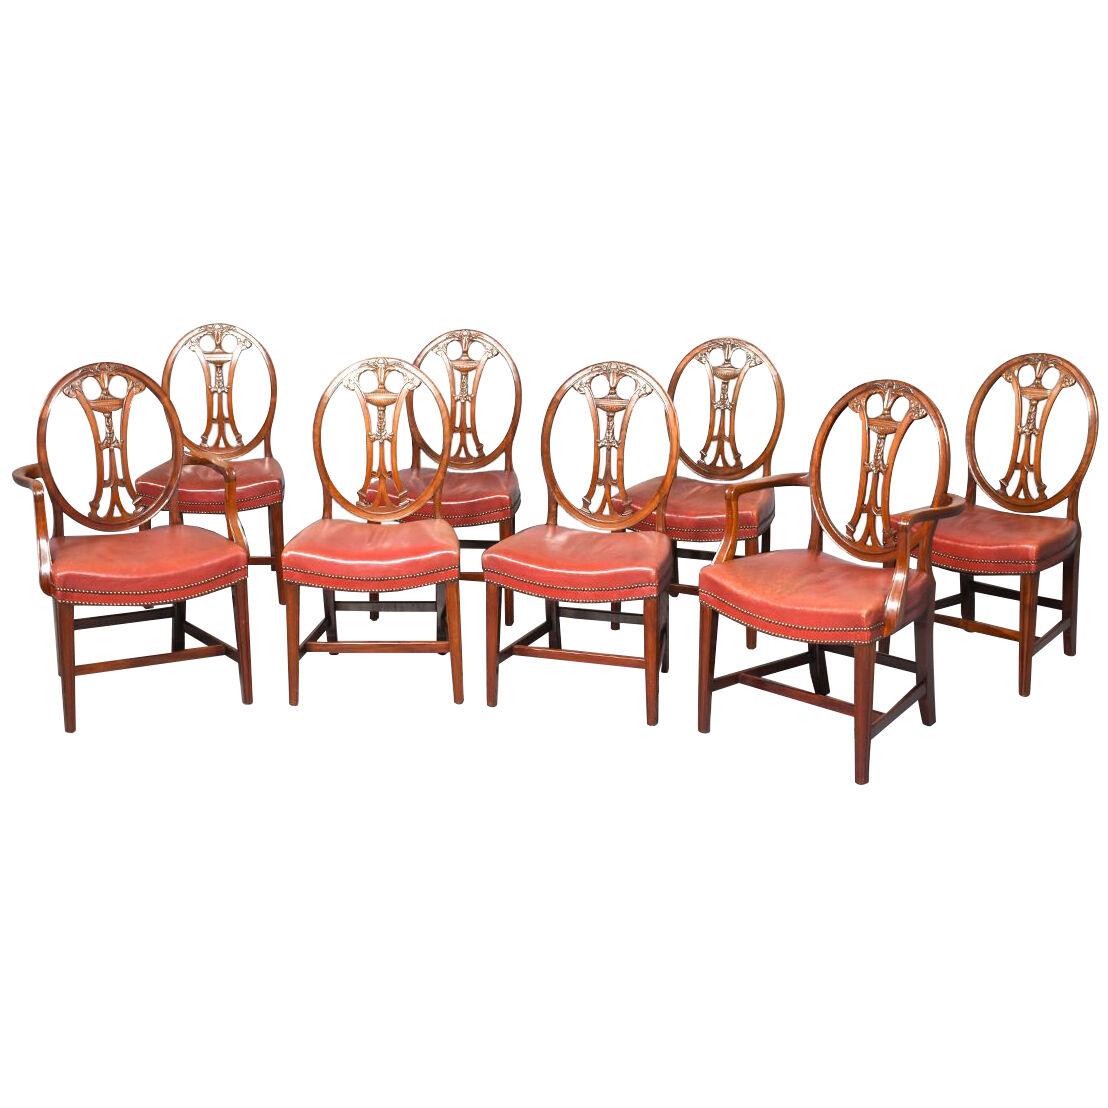 Exhibition Quality Adam Style Dining Chairs (8)